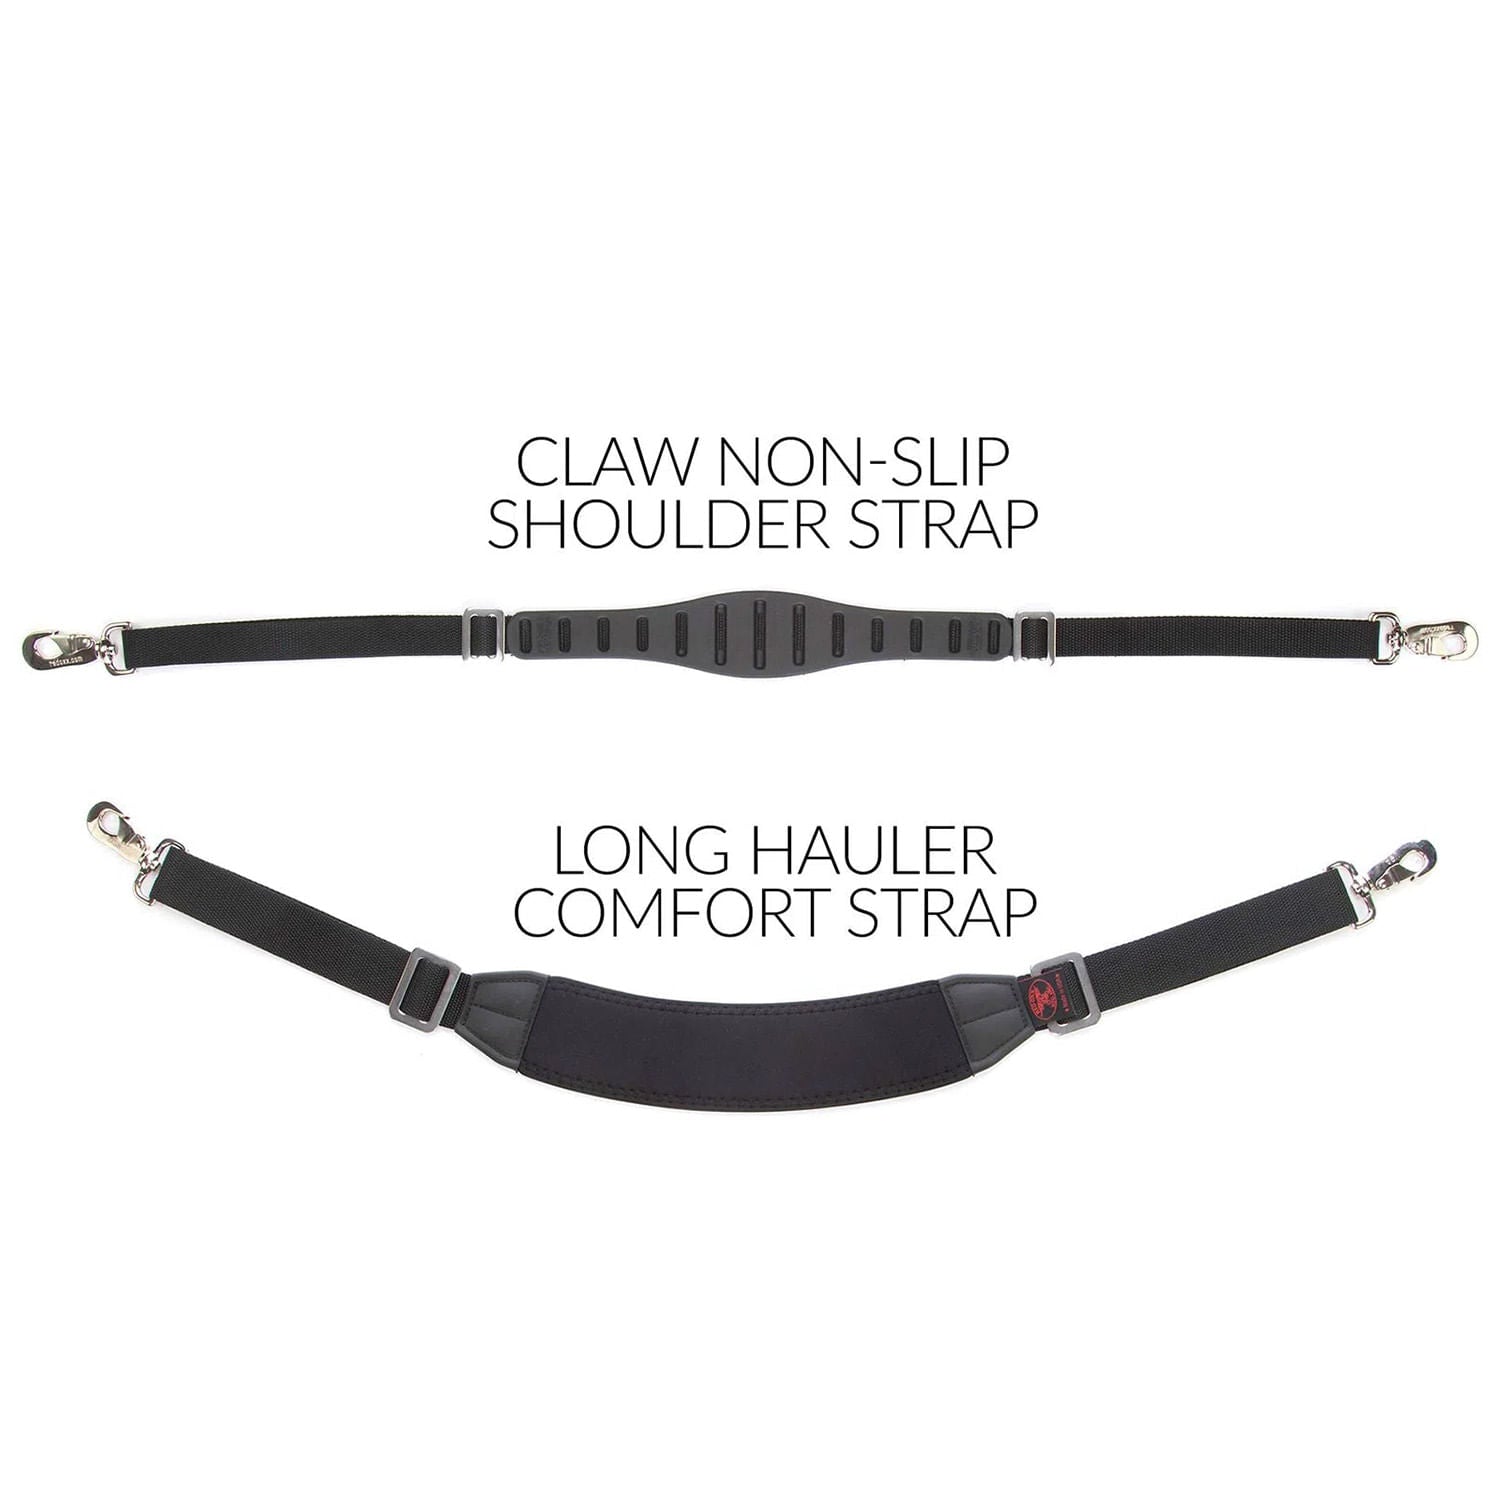 The Definitive Guide that You Never Wanted: Shoulder Straps